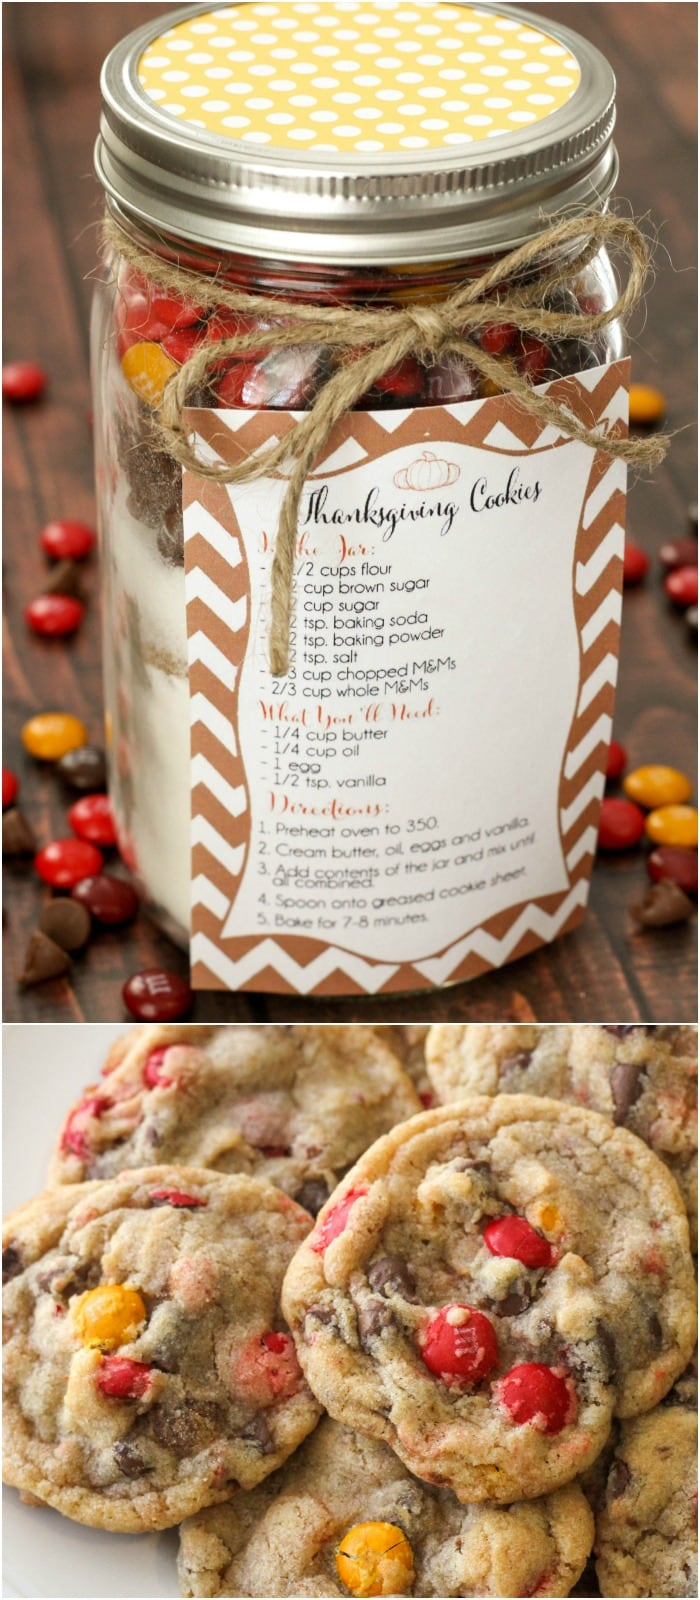 Thanksgiving Cookies In A Jar